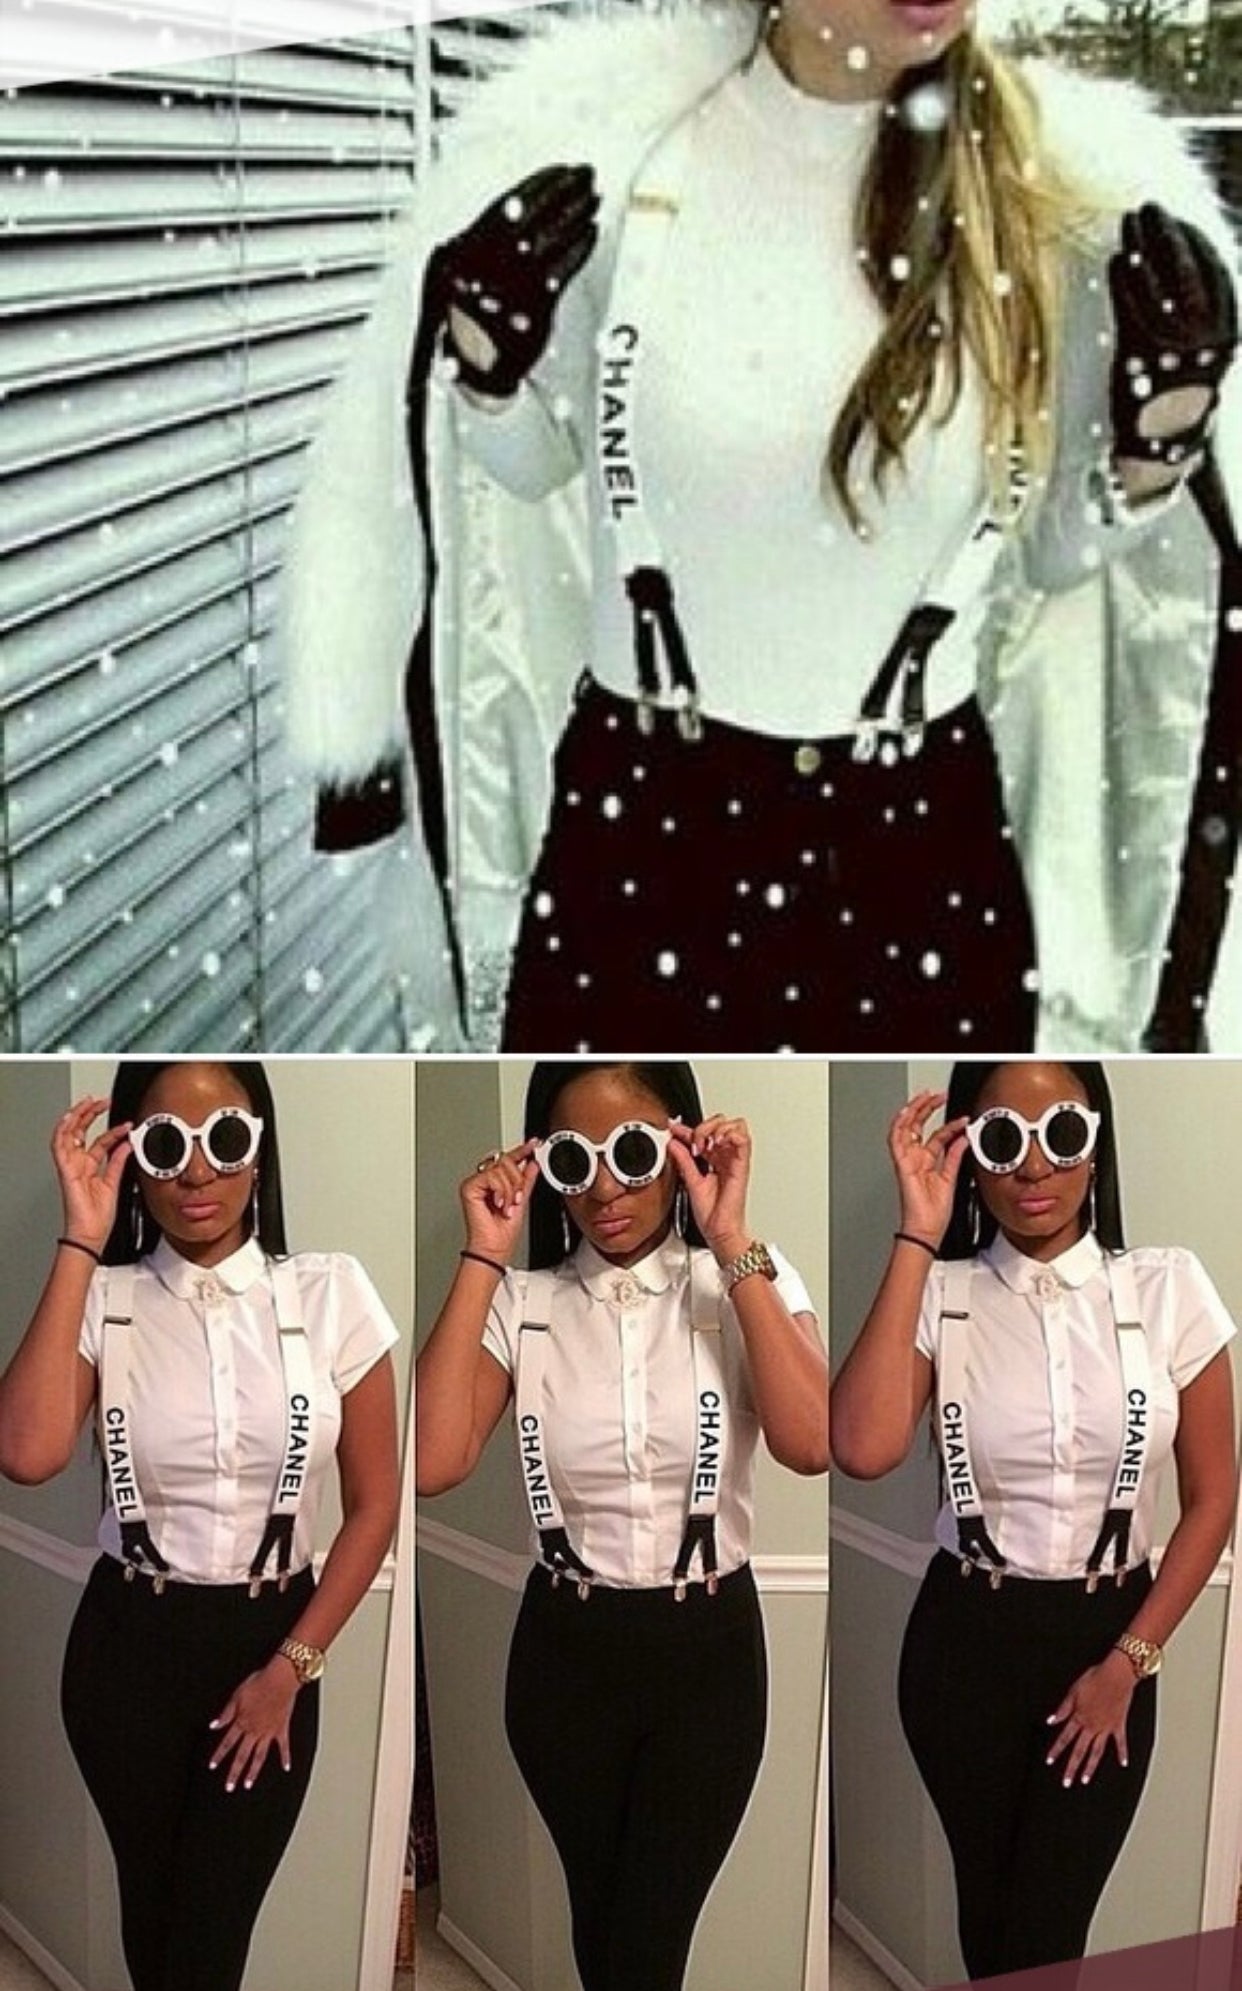 OOTD: Chanel Suspenders - Her Modern Life Outfit of the Day